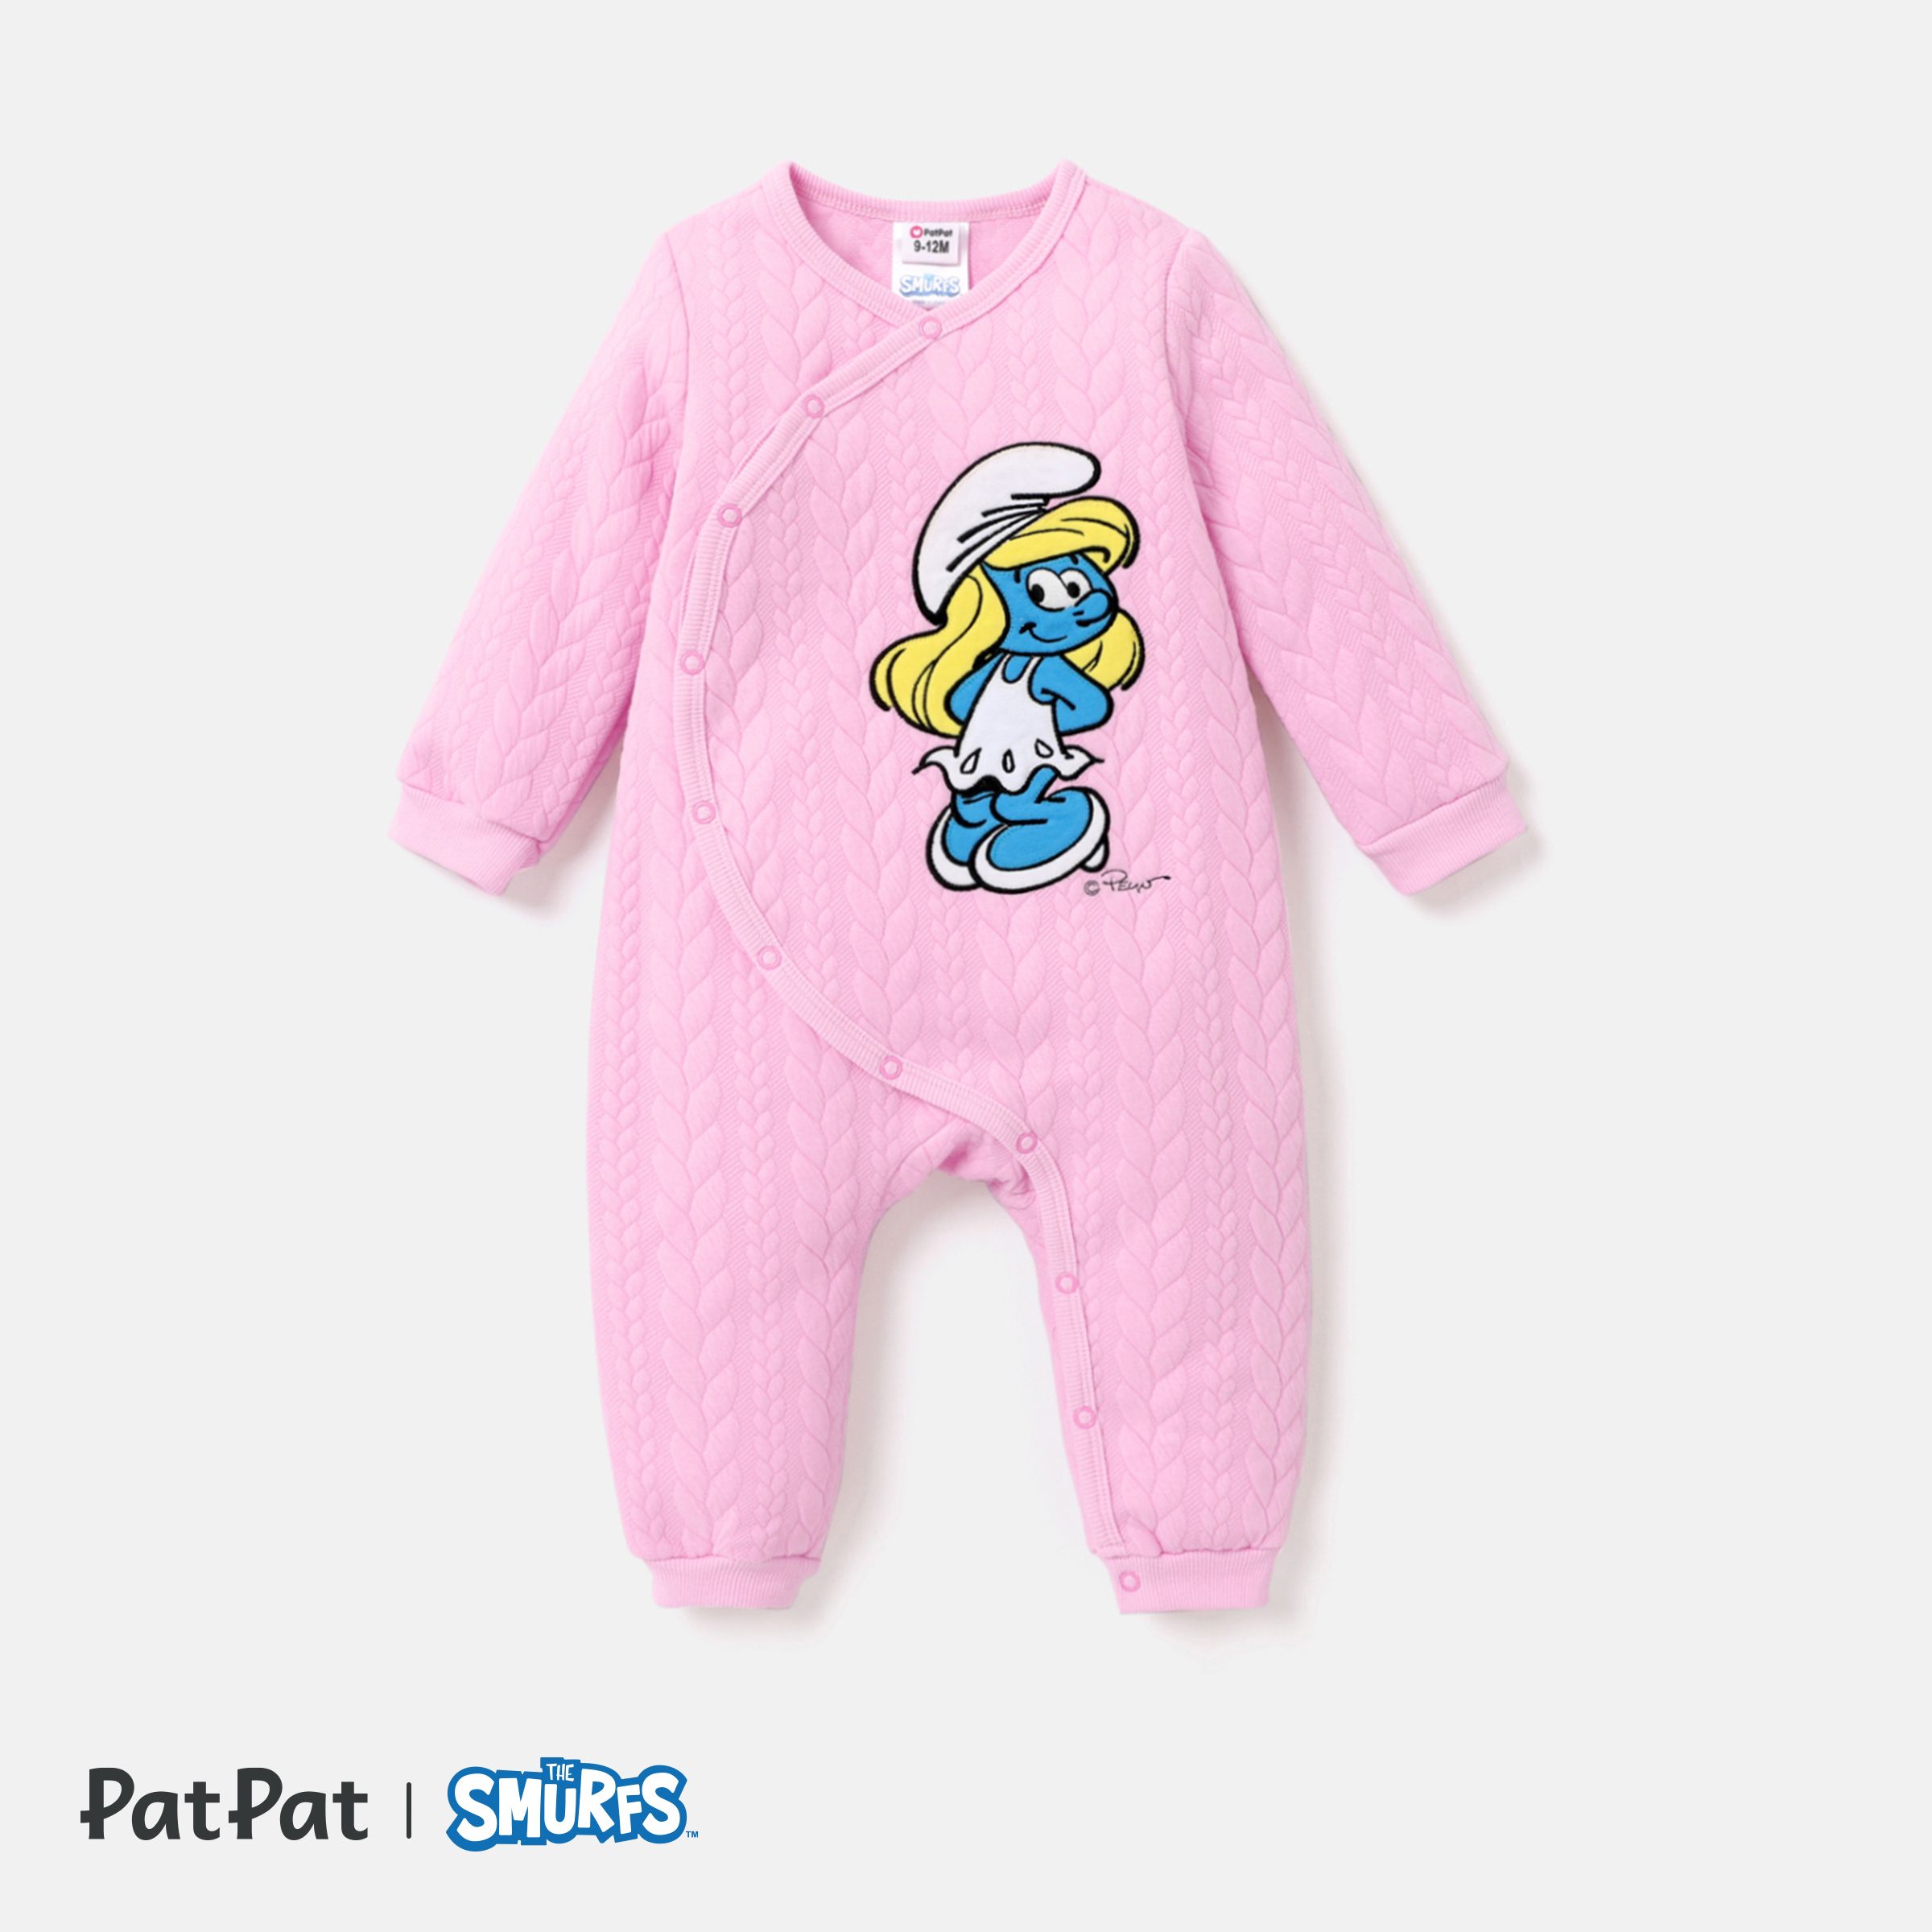 The Smurfs Baby Boy/Girl Patch Embroidered Jumpsuit